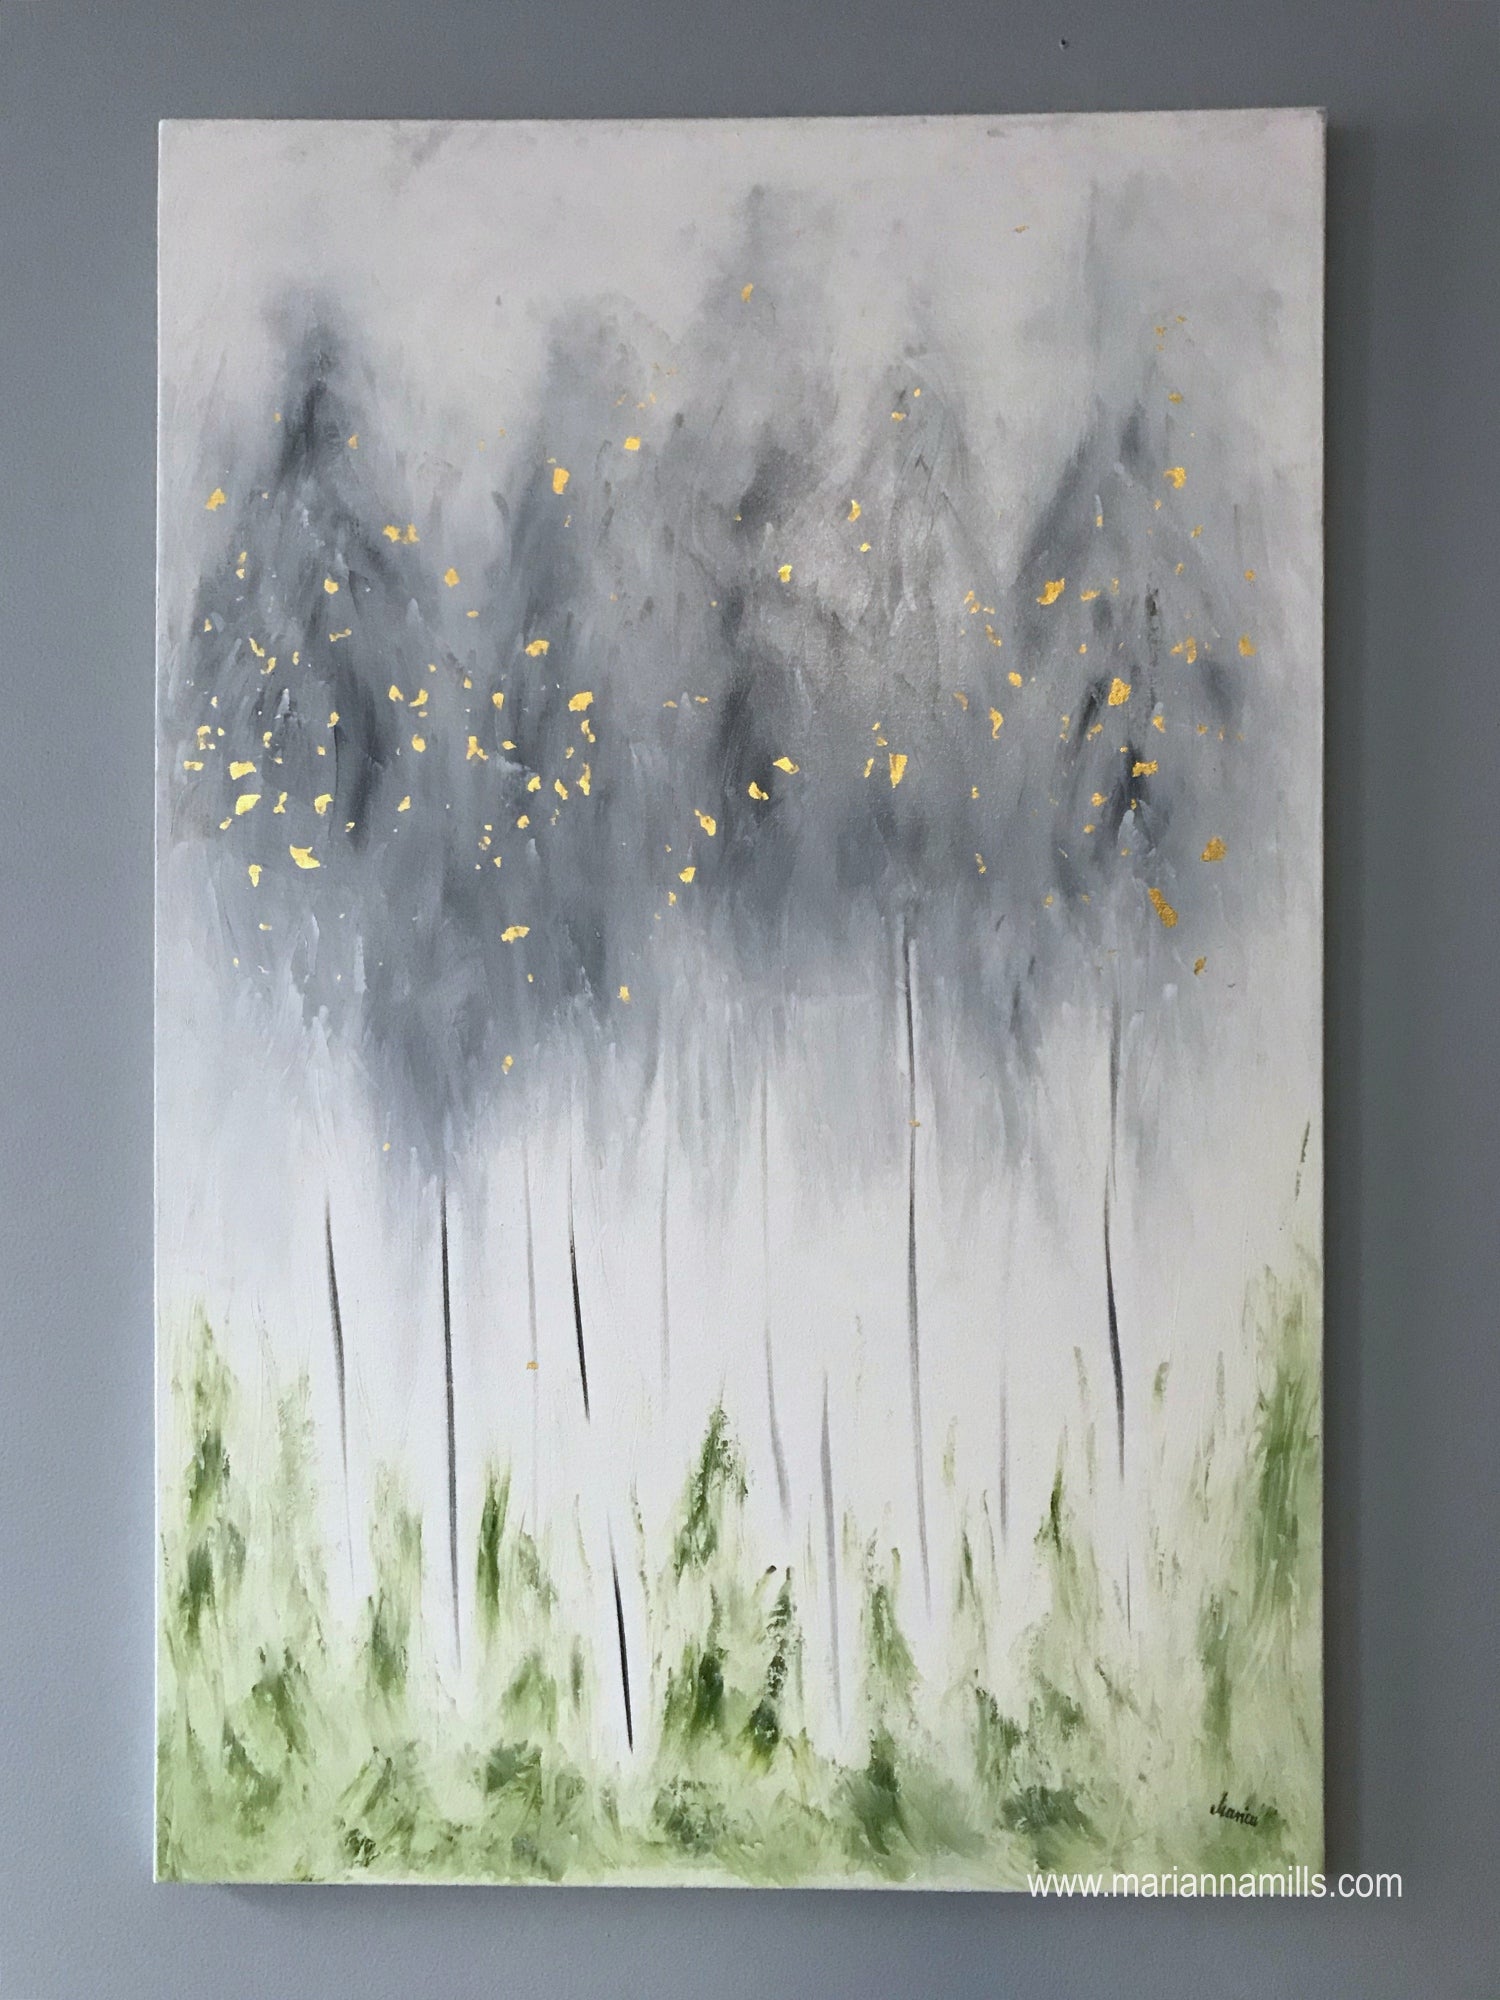 original surreal oil painting with 22k gold leaves by Marianna Mills, Hungarian artist. title is The first of Phoenix and it featuring gray trees with white background and fresh green grass.